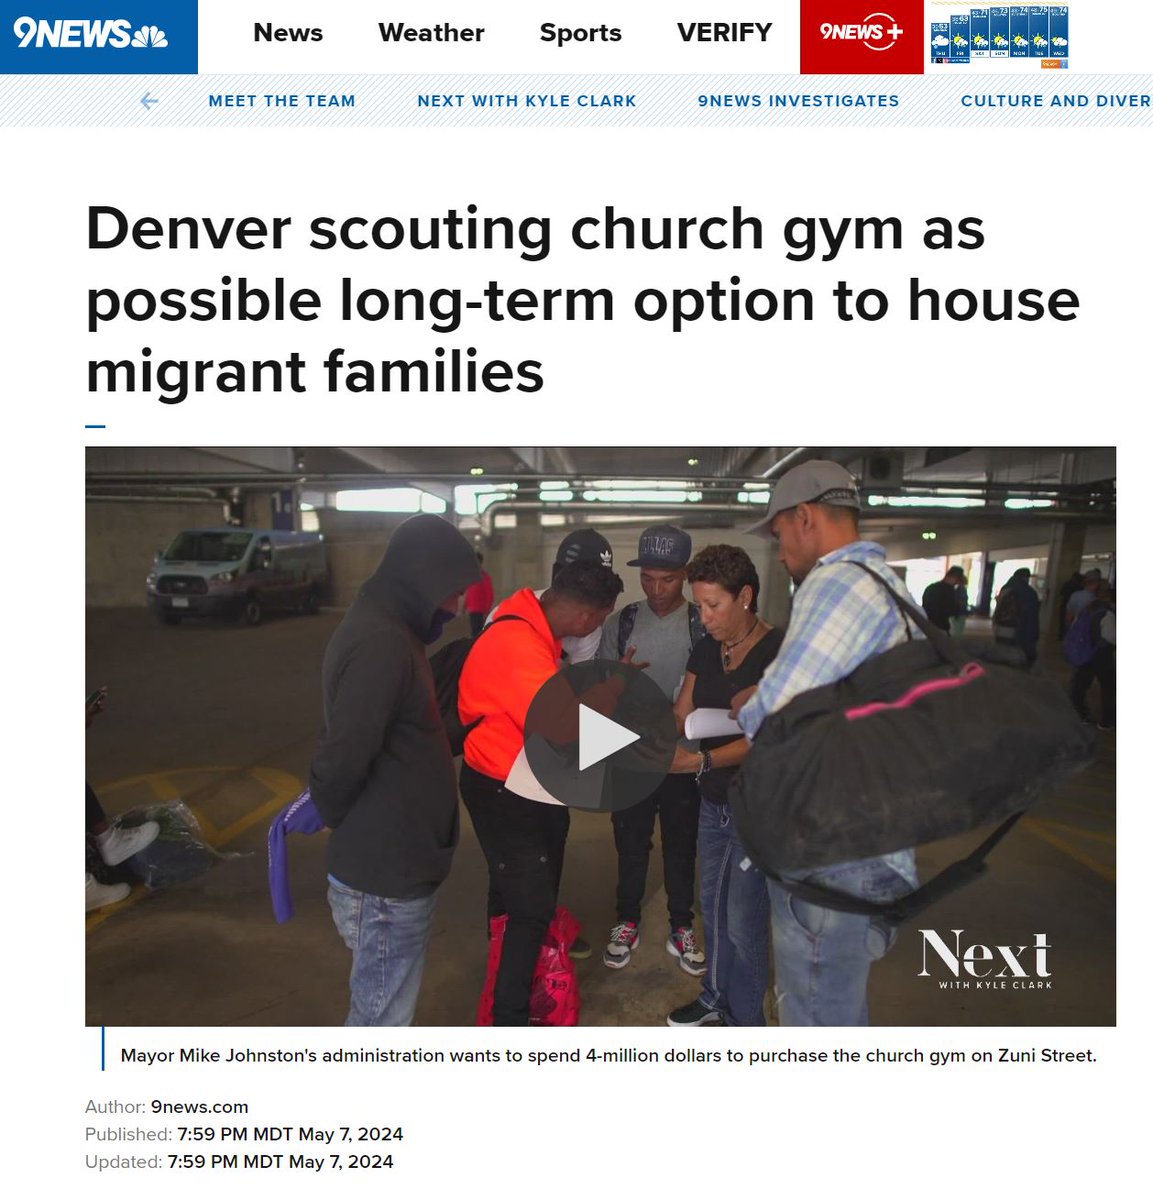 Denver is now exploring 'long term' options to house illegals